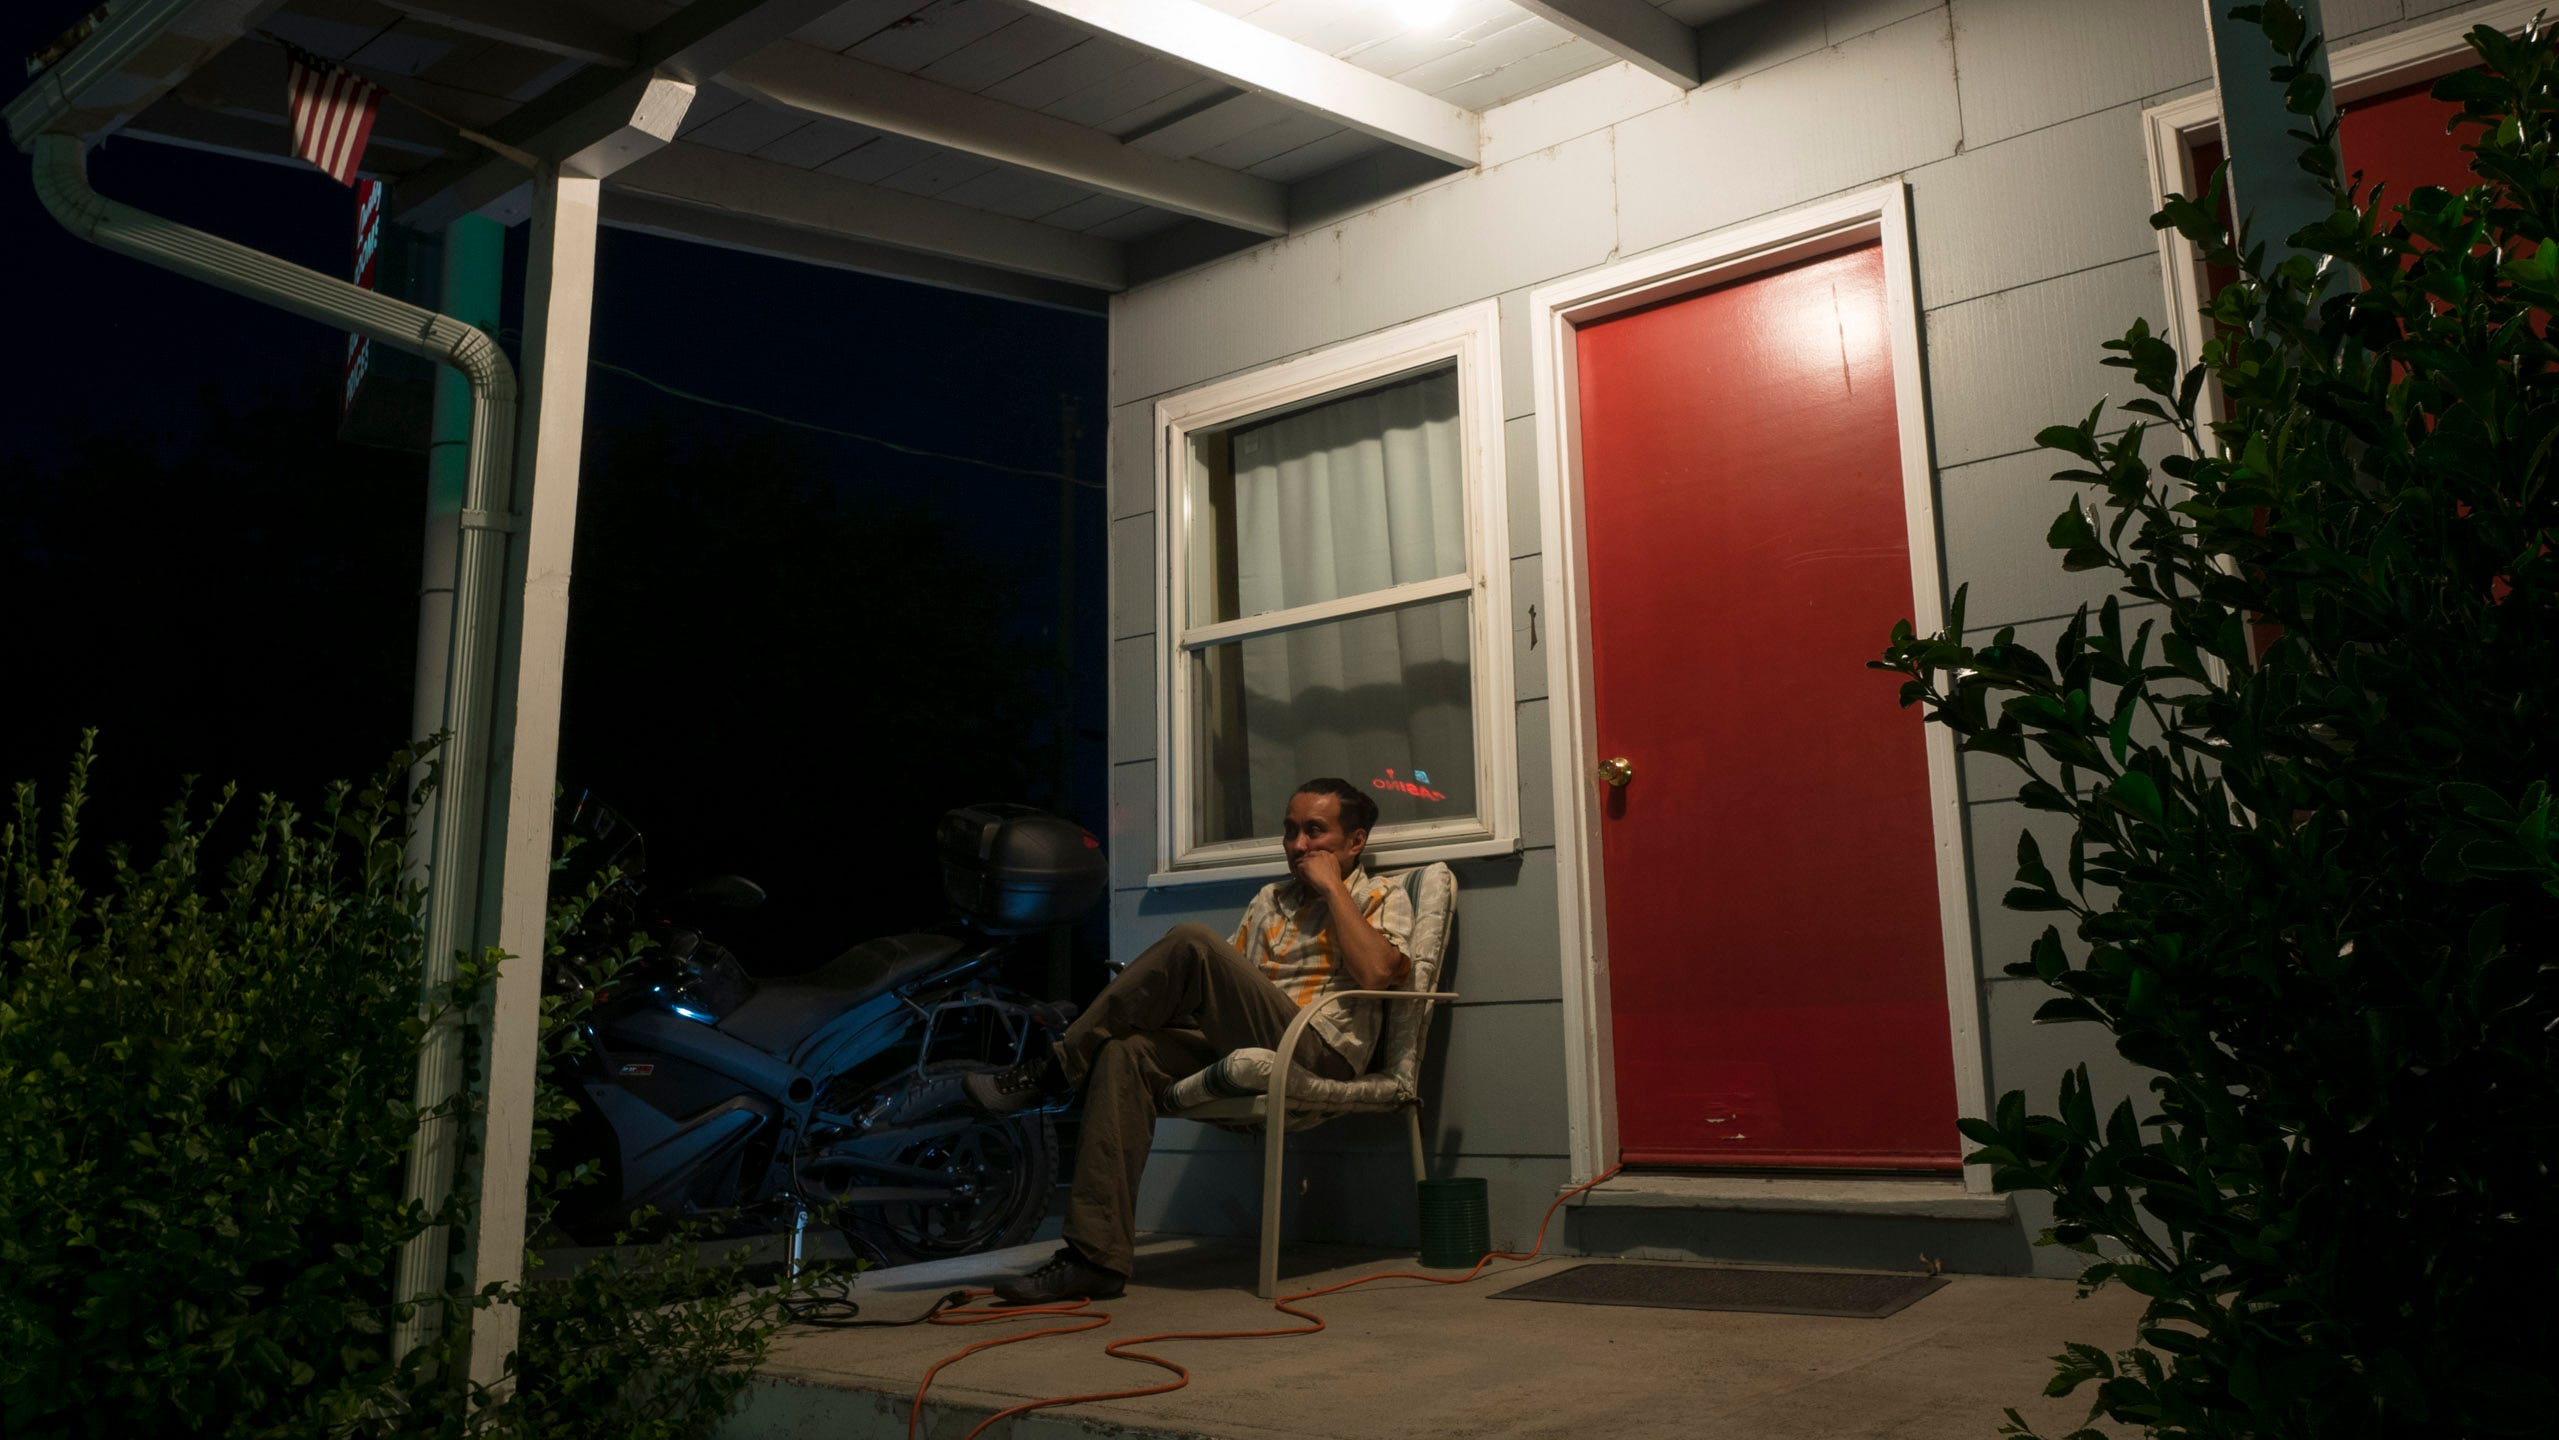 A man sits on the porch outside of his hotel room on a lawn chair. The door to his room is red. A single overhead light illuminates the concrete porch. Sneaking out of the corner of the doorway is an orange extension cord that snakes across the concrete and past the man to a black electric motorcycle sitting in the dark. A couple of shrubs frame the photo. A small US flag hangs from one of the posts holding up the overhanging roof.